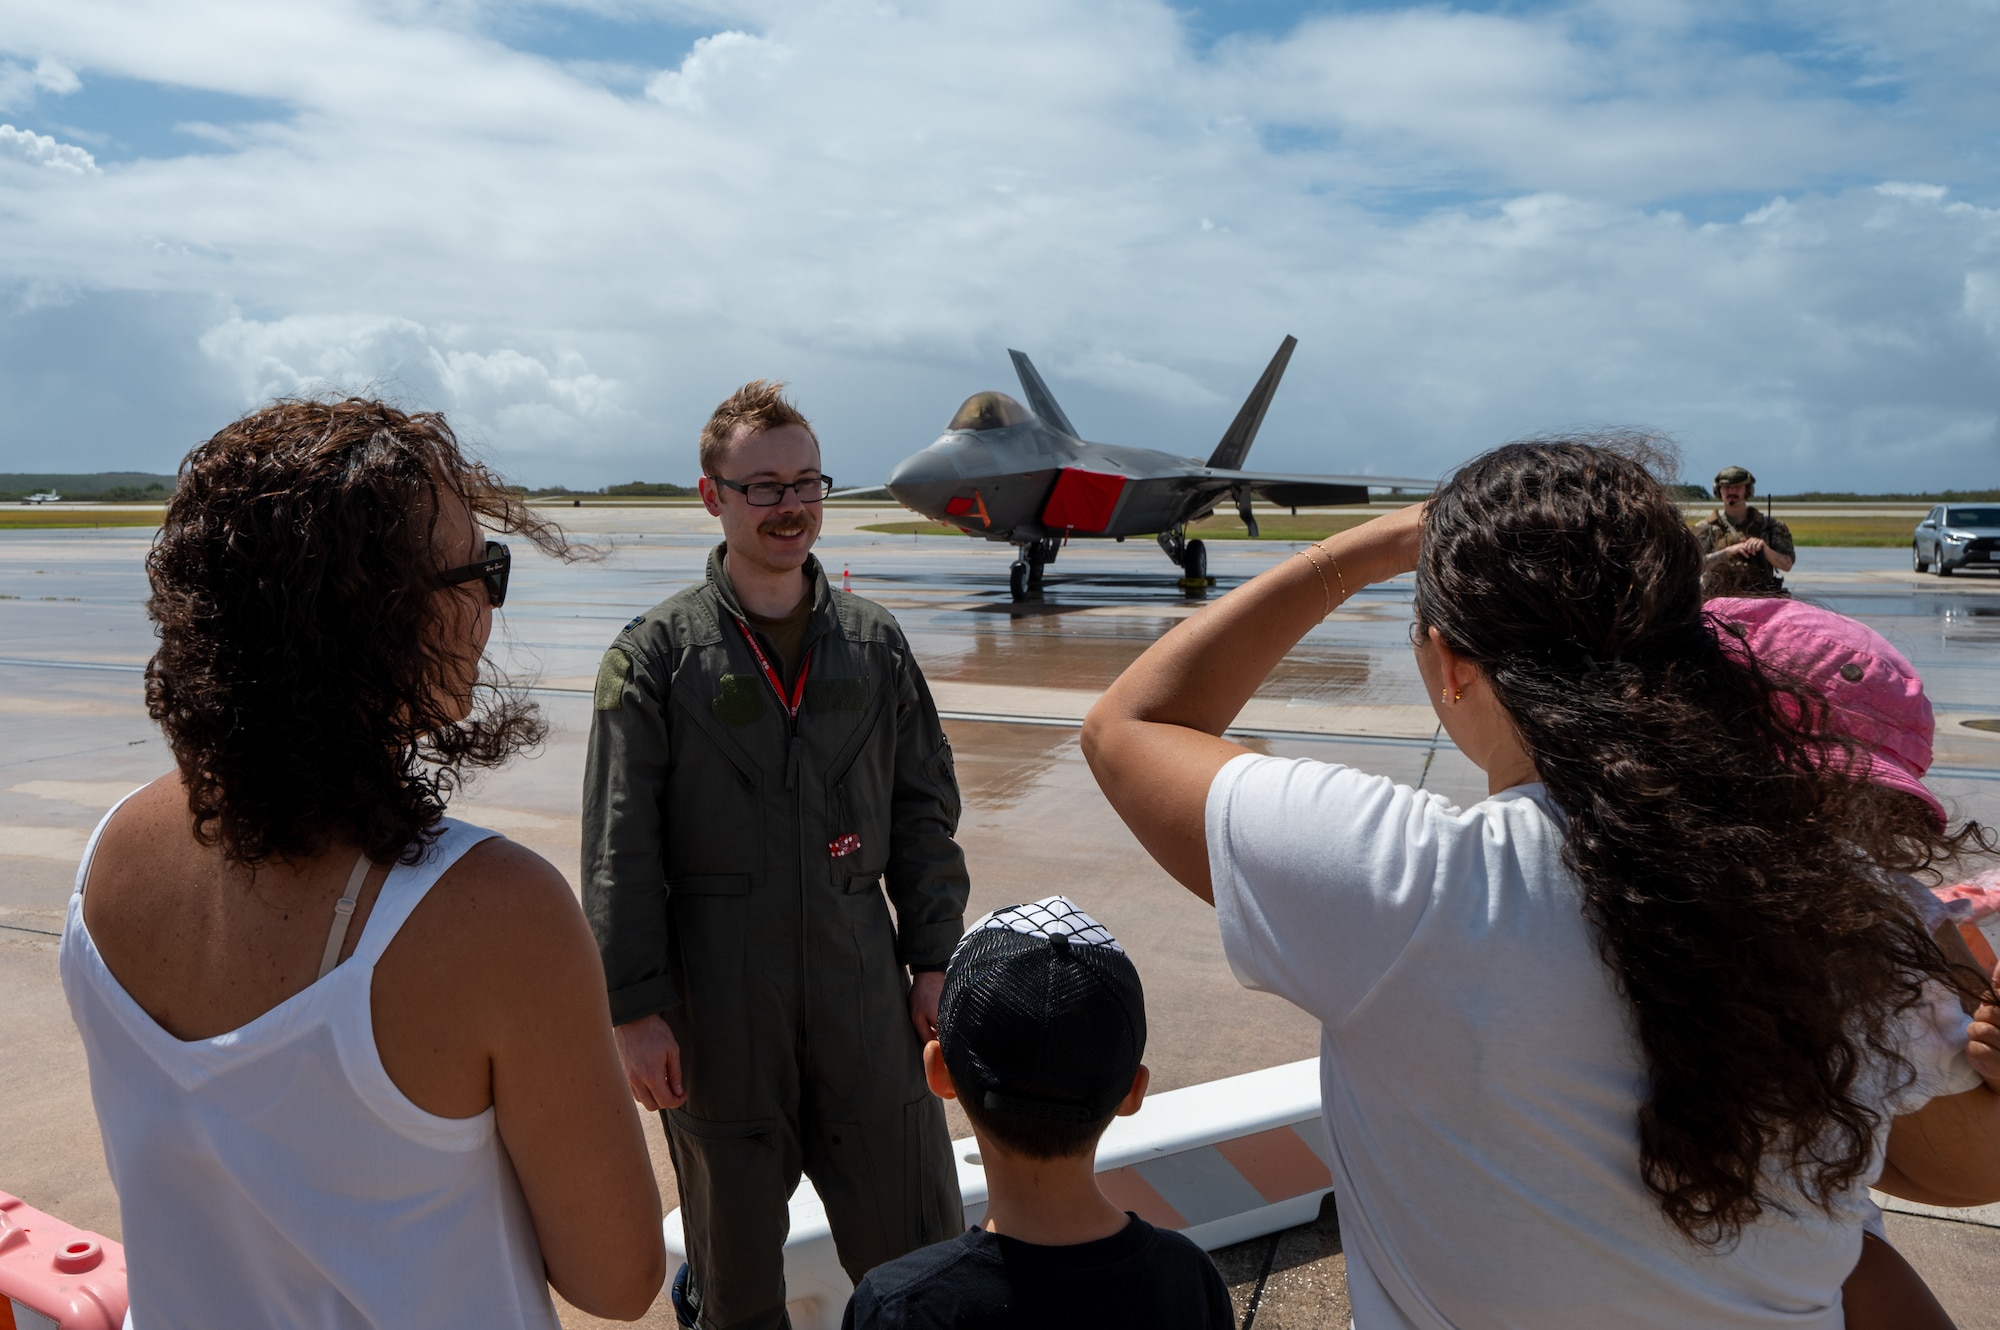 An Airman assigned to the 3rd Air Expeditionary Wing speaks to people during a community day at Saipan, Northern Mariana Islands on April 13, 2024. The event was held during Exercise Agile Reaper 24-1 and gave community members an opportunity to speak with Airmen and learn more about the aircraft and their capabilities. (U.S. Air Force photo by Senior Airman Mark Sulaica)